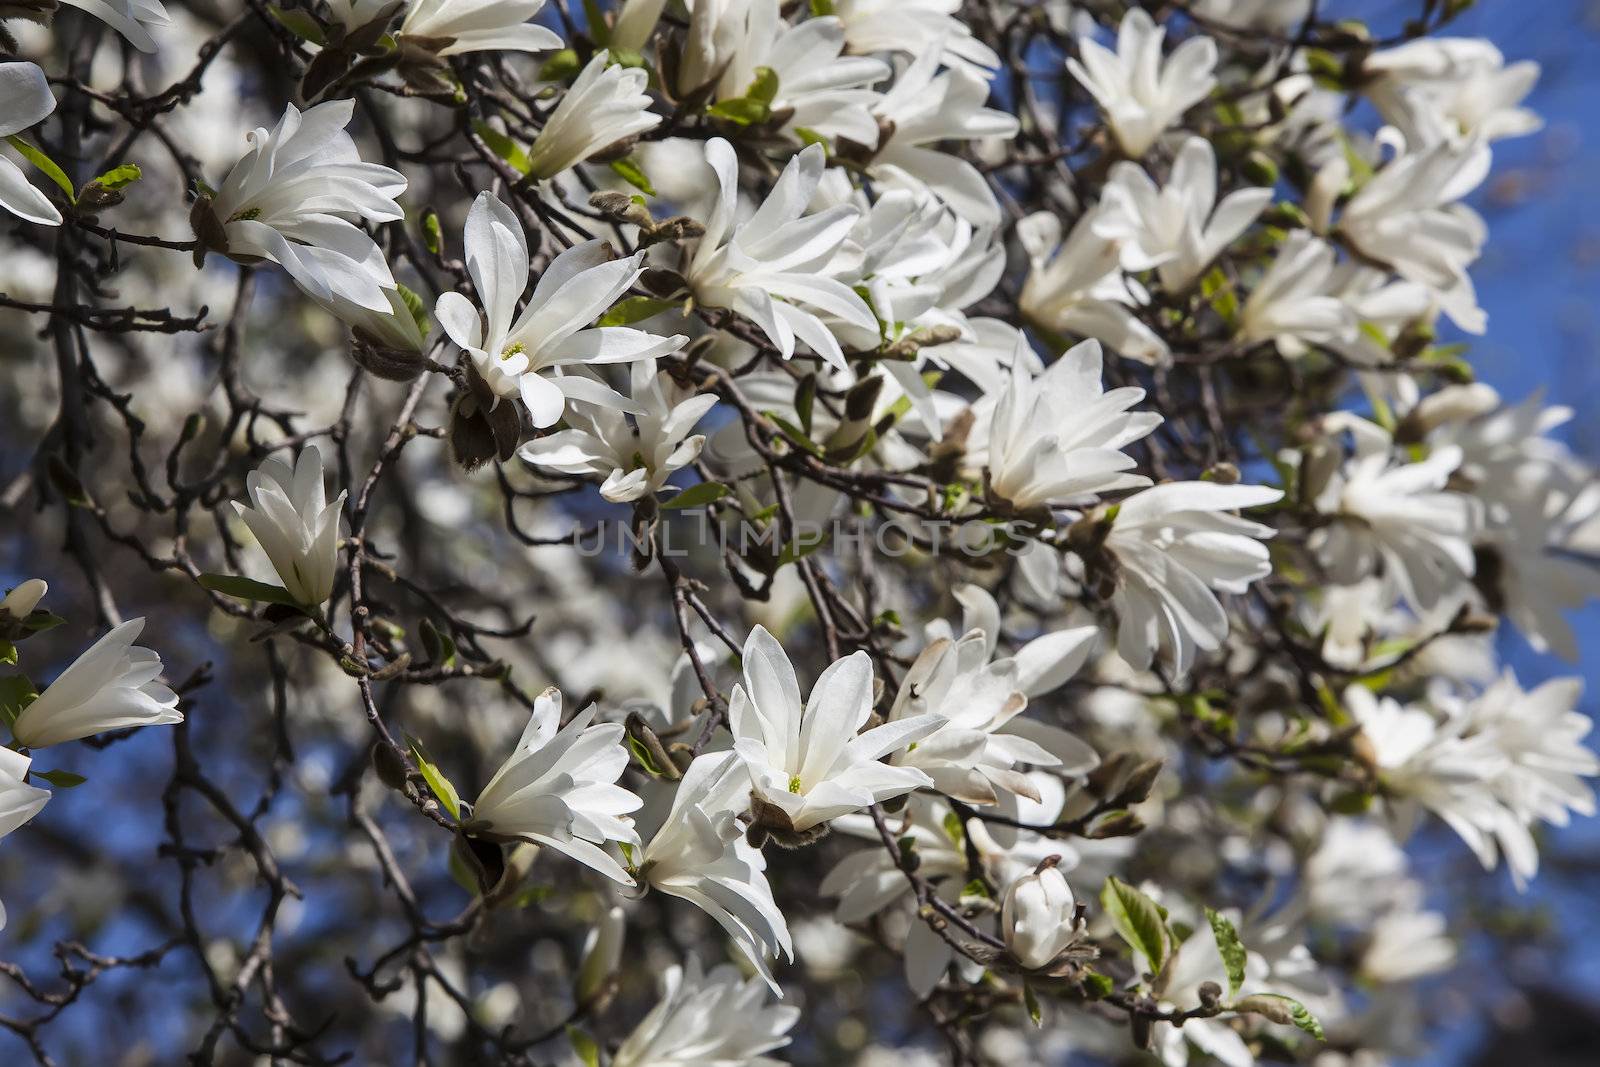 Magnolia kobus. Blooming tree with white flowers against the blue sky